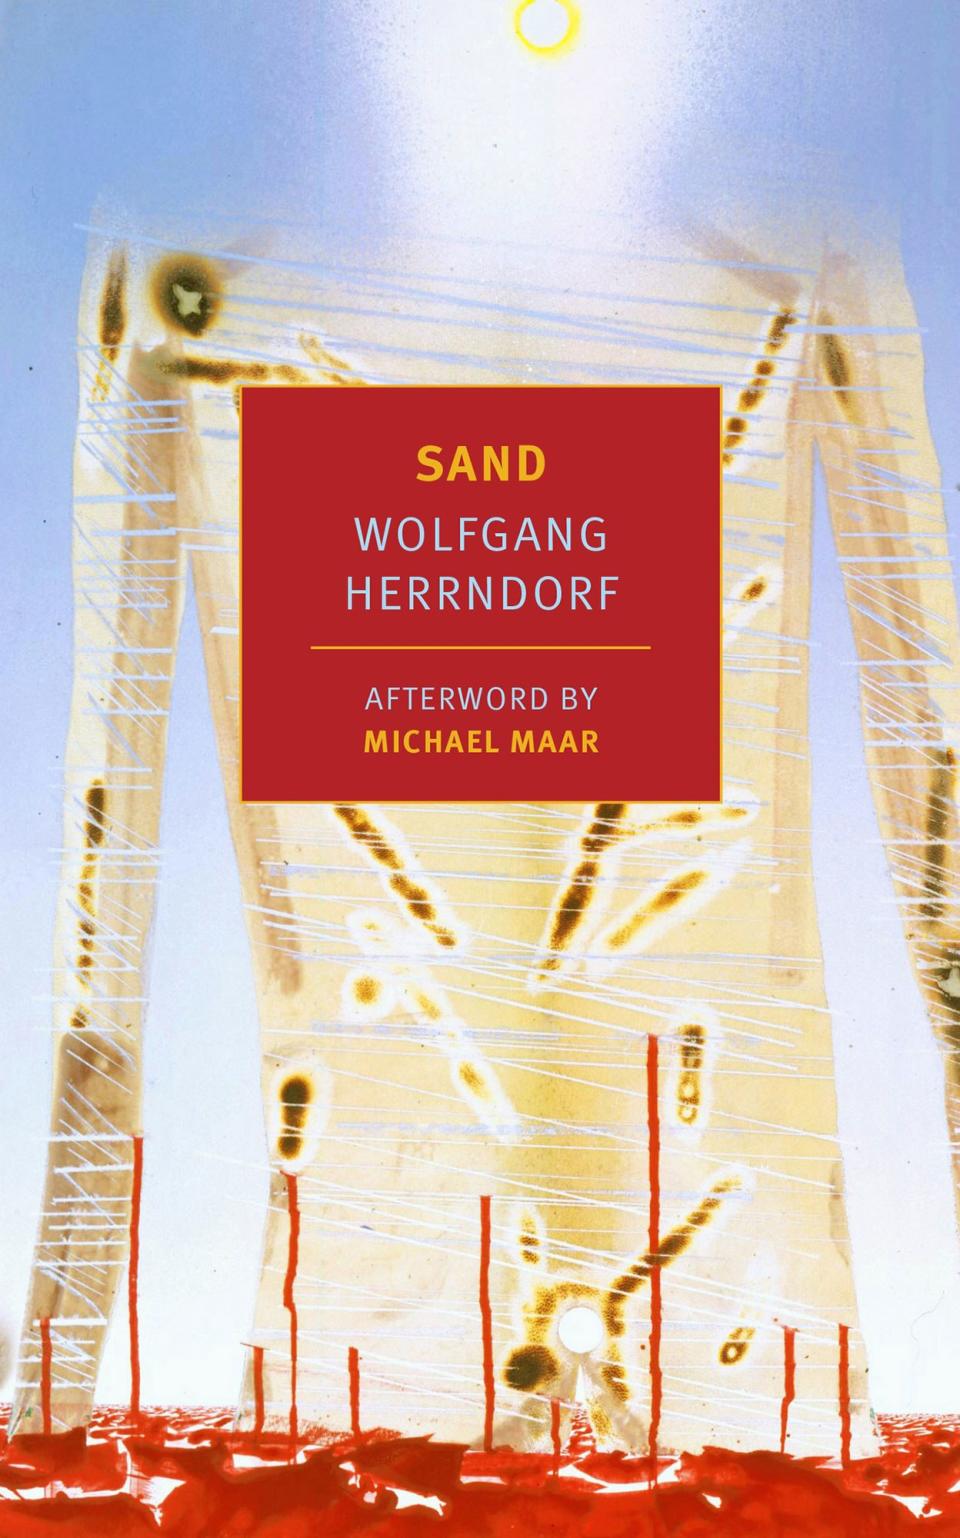 Sand by Wolfgang Herrndorf (New York Review Books)